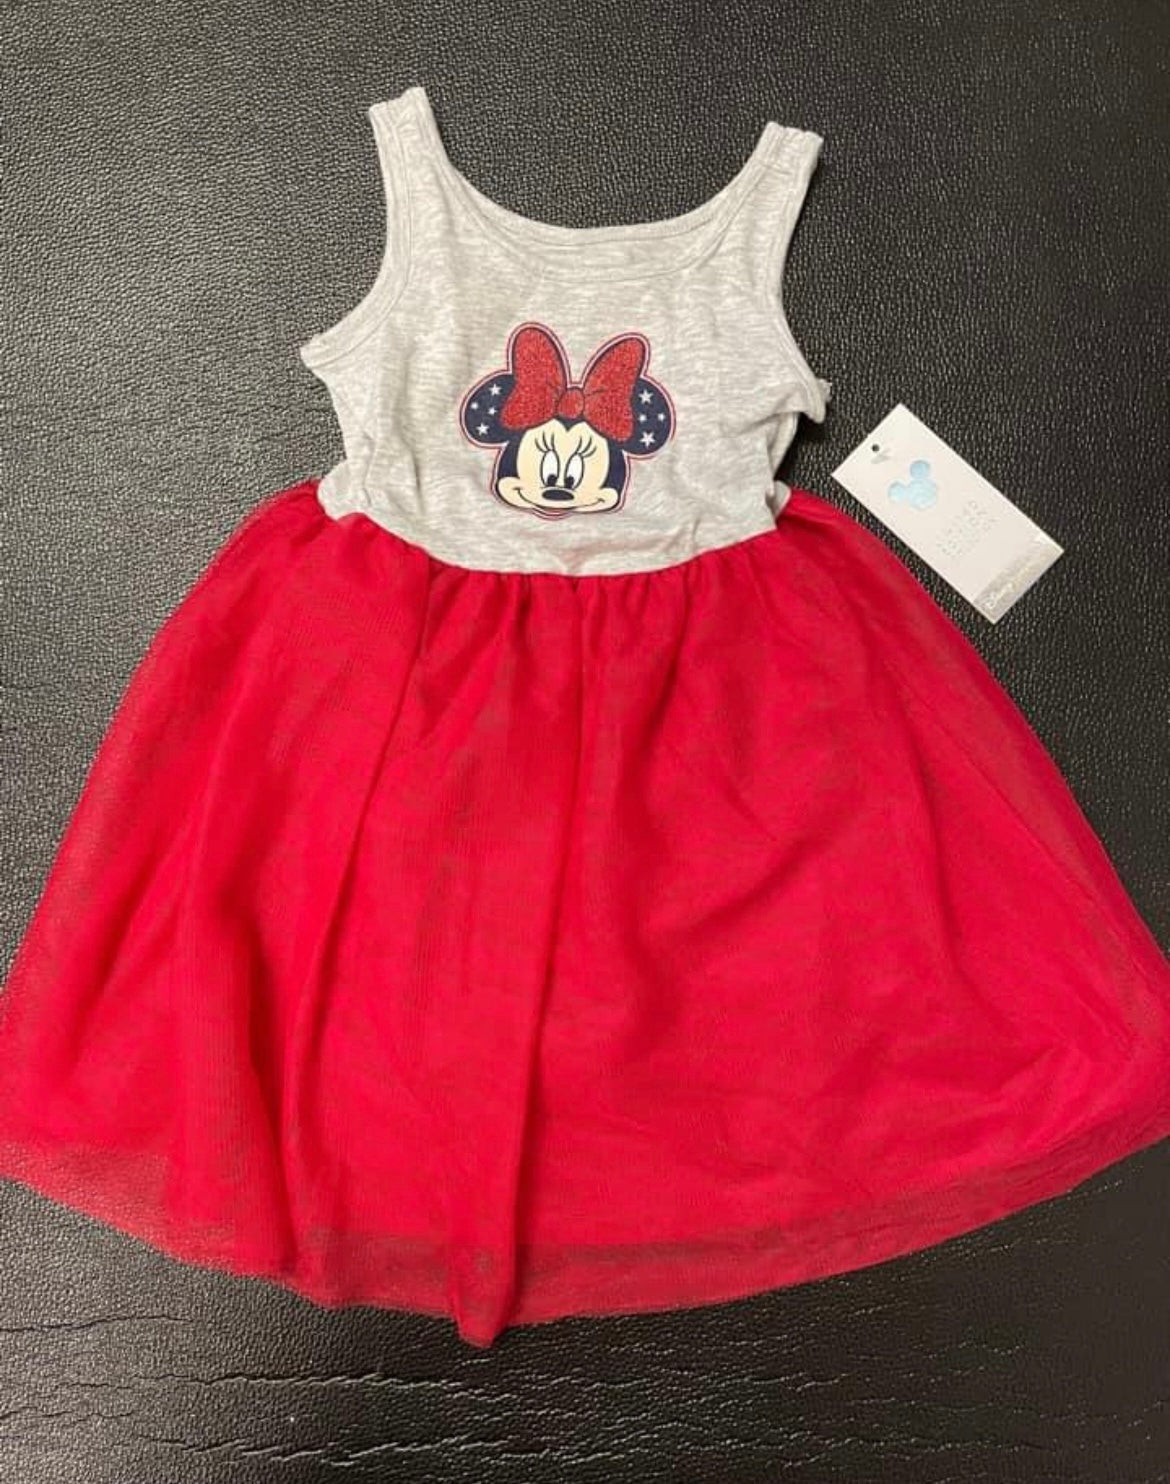 New 24 mo Disney by jumping beans. 24 months. Perfect for a trip to Disney!